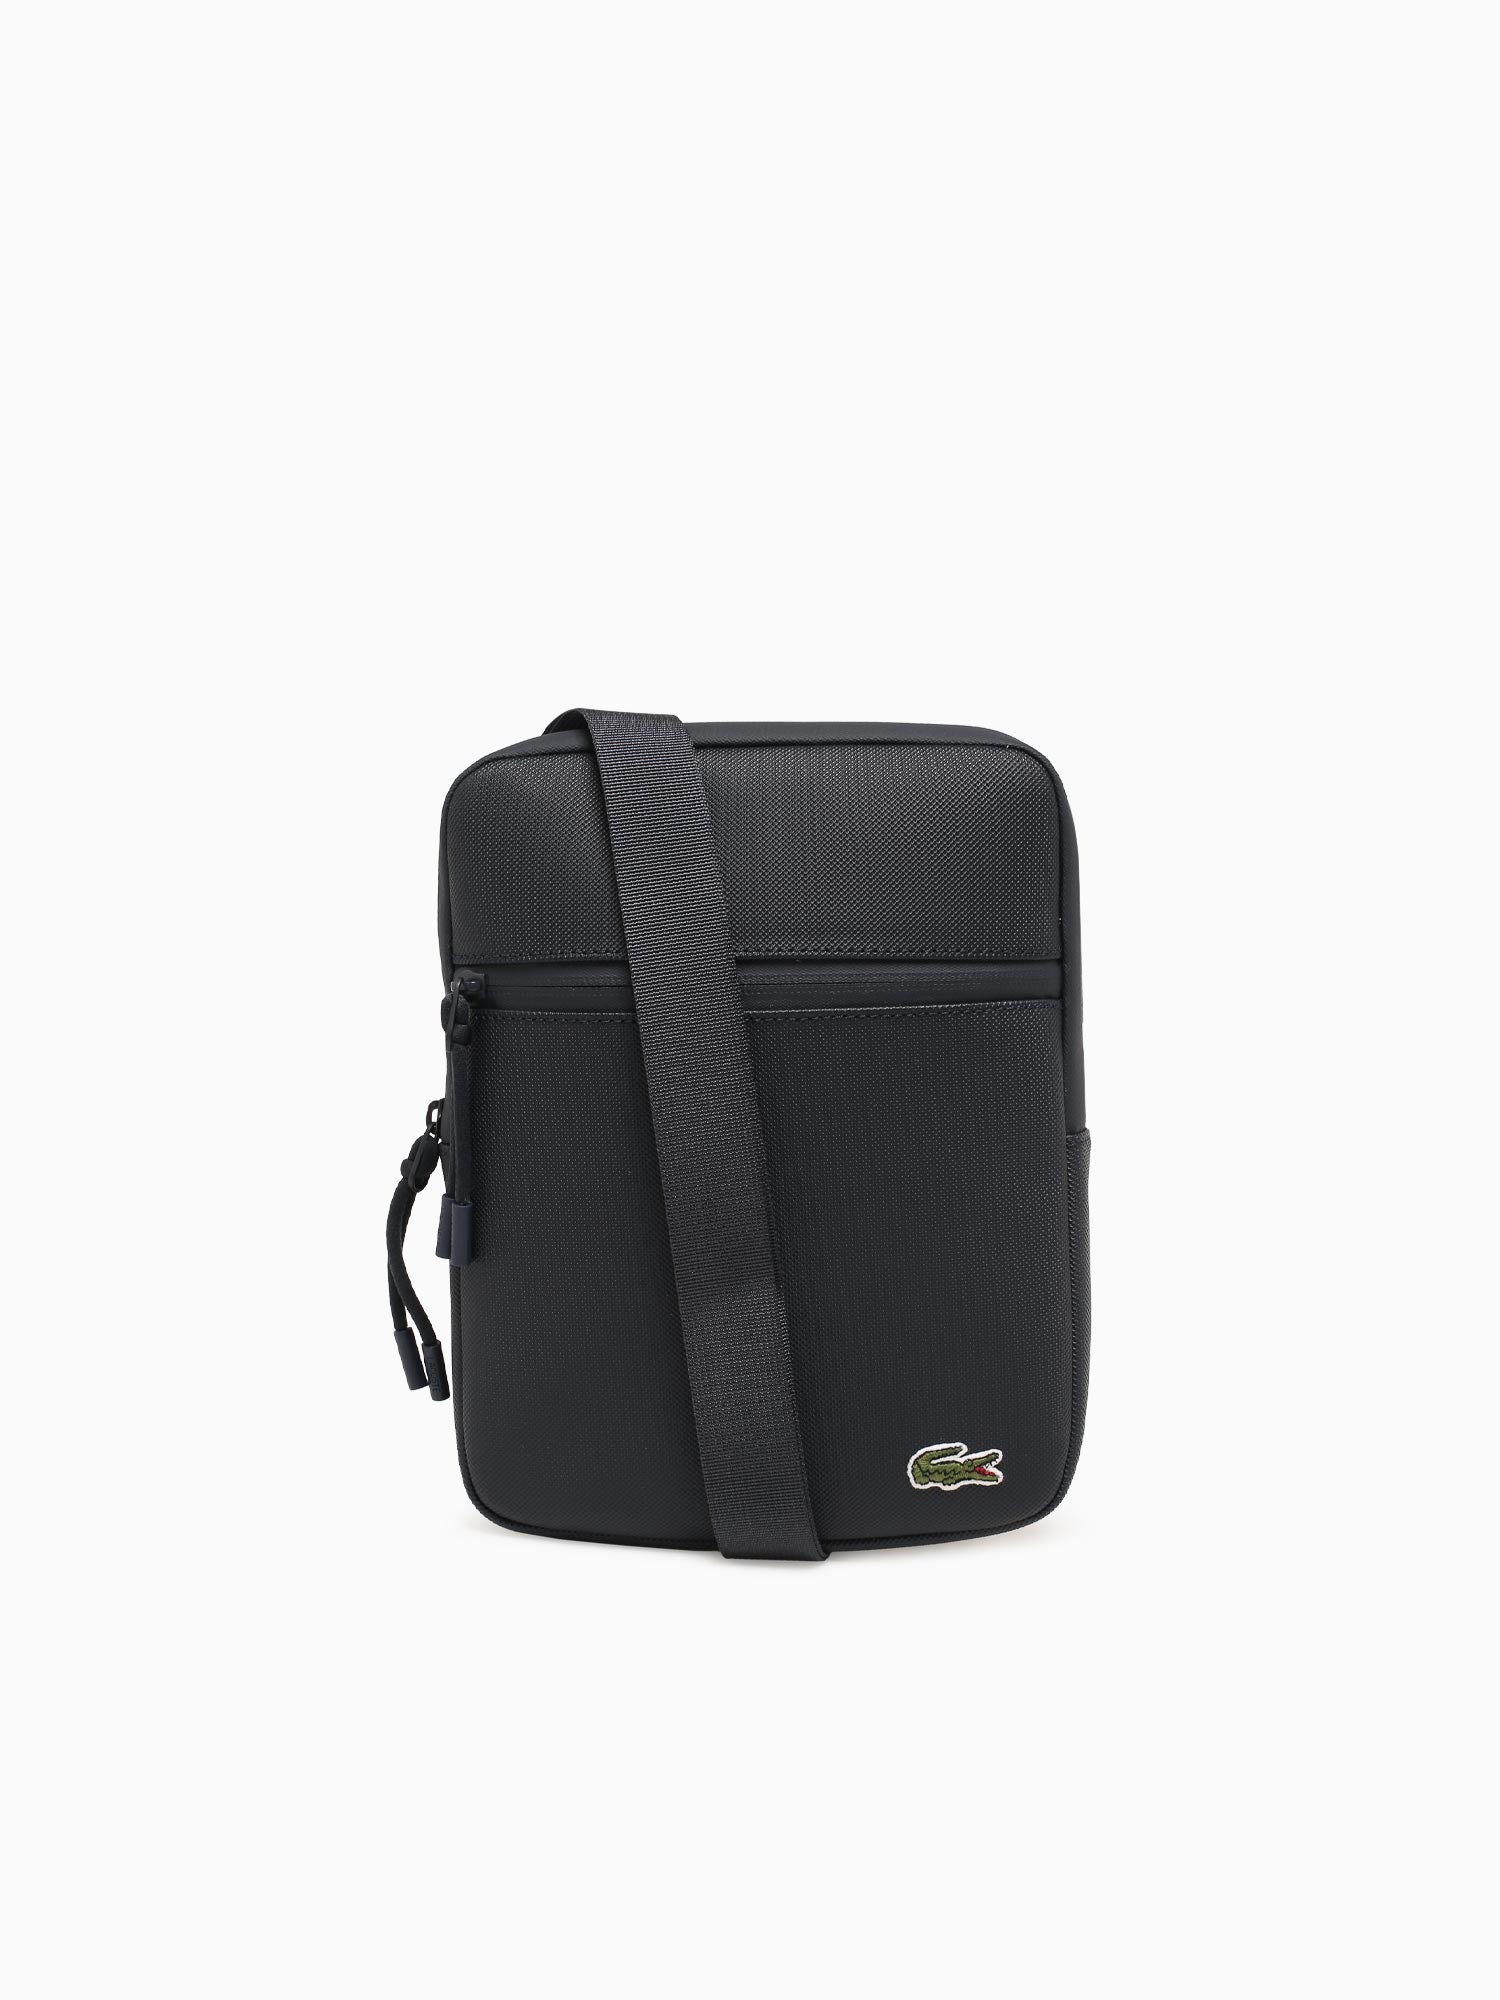 Lcst M Flat Crossover Bag B88 Eclipse